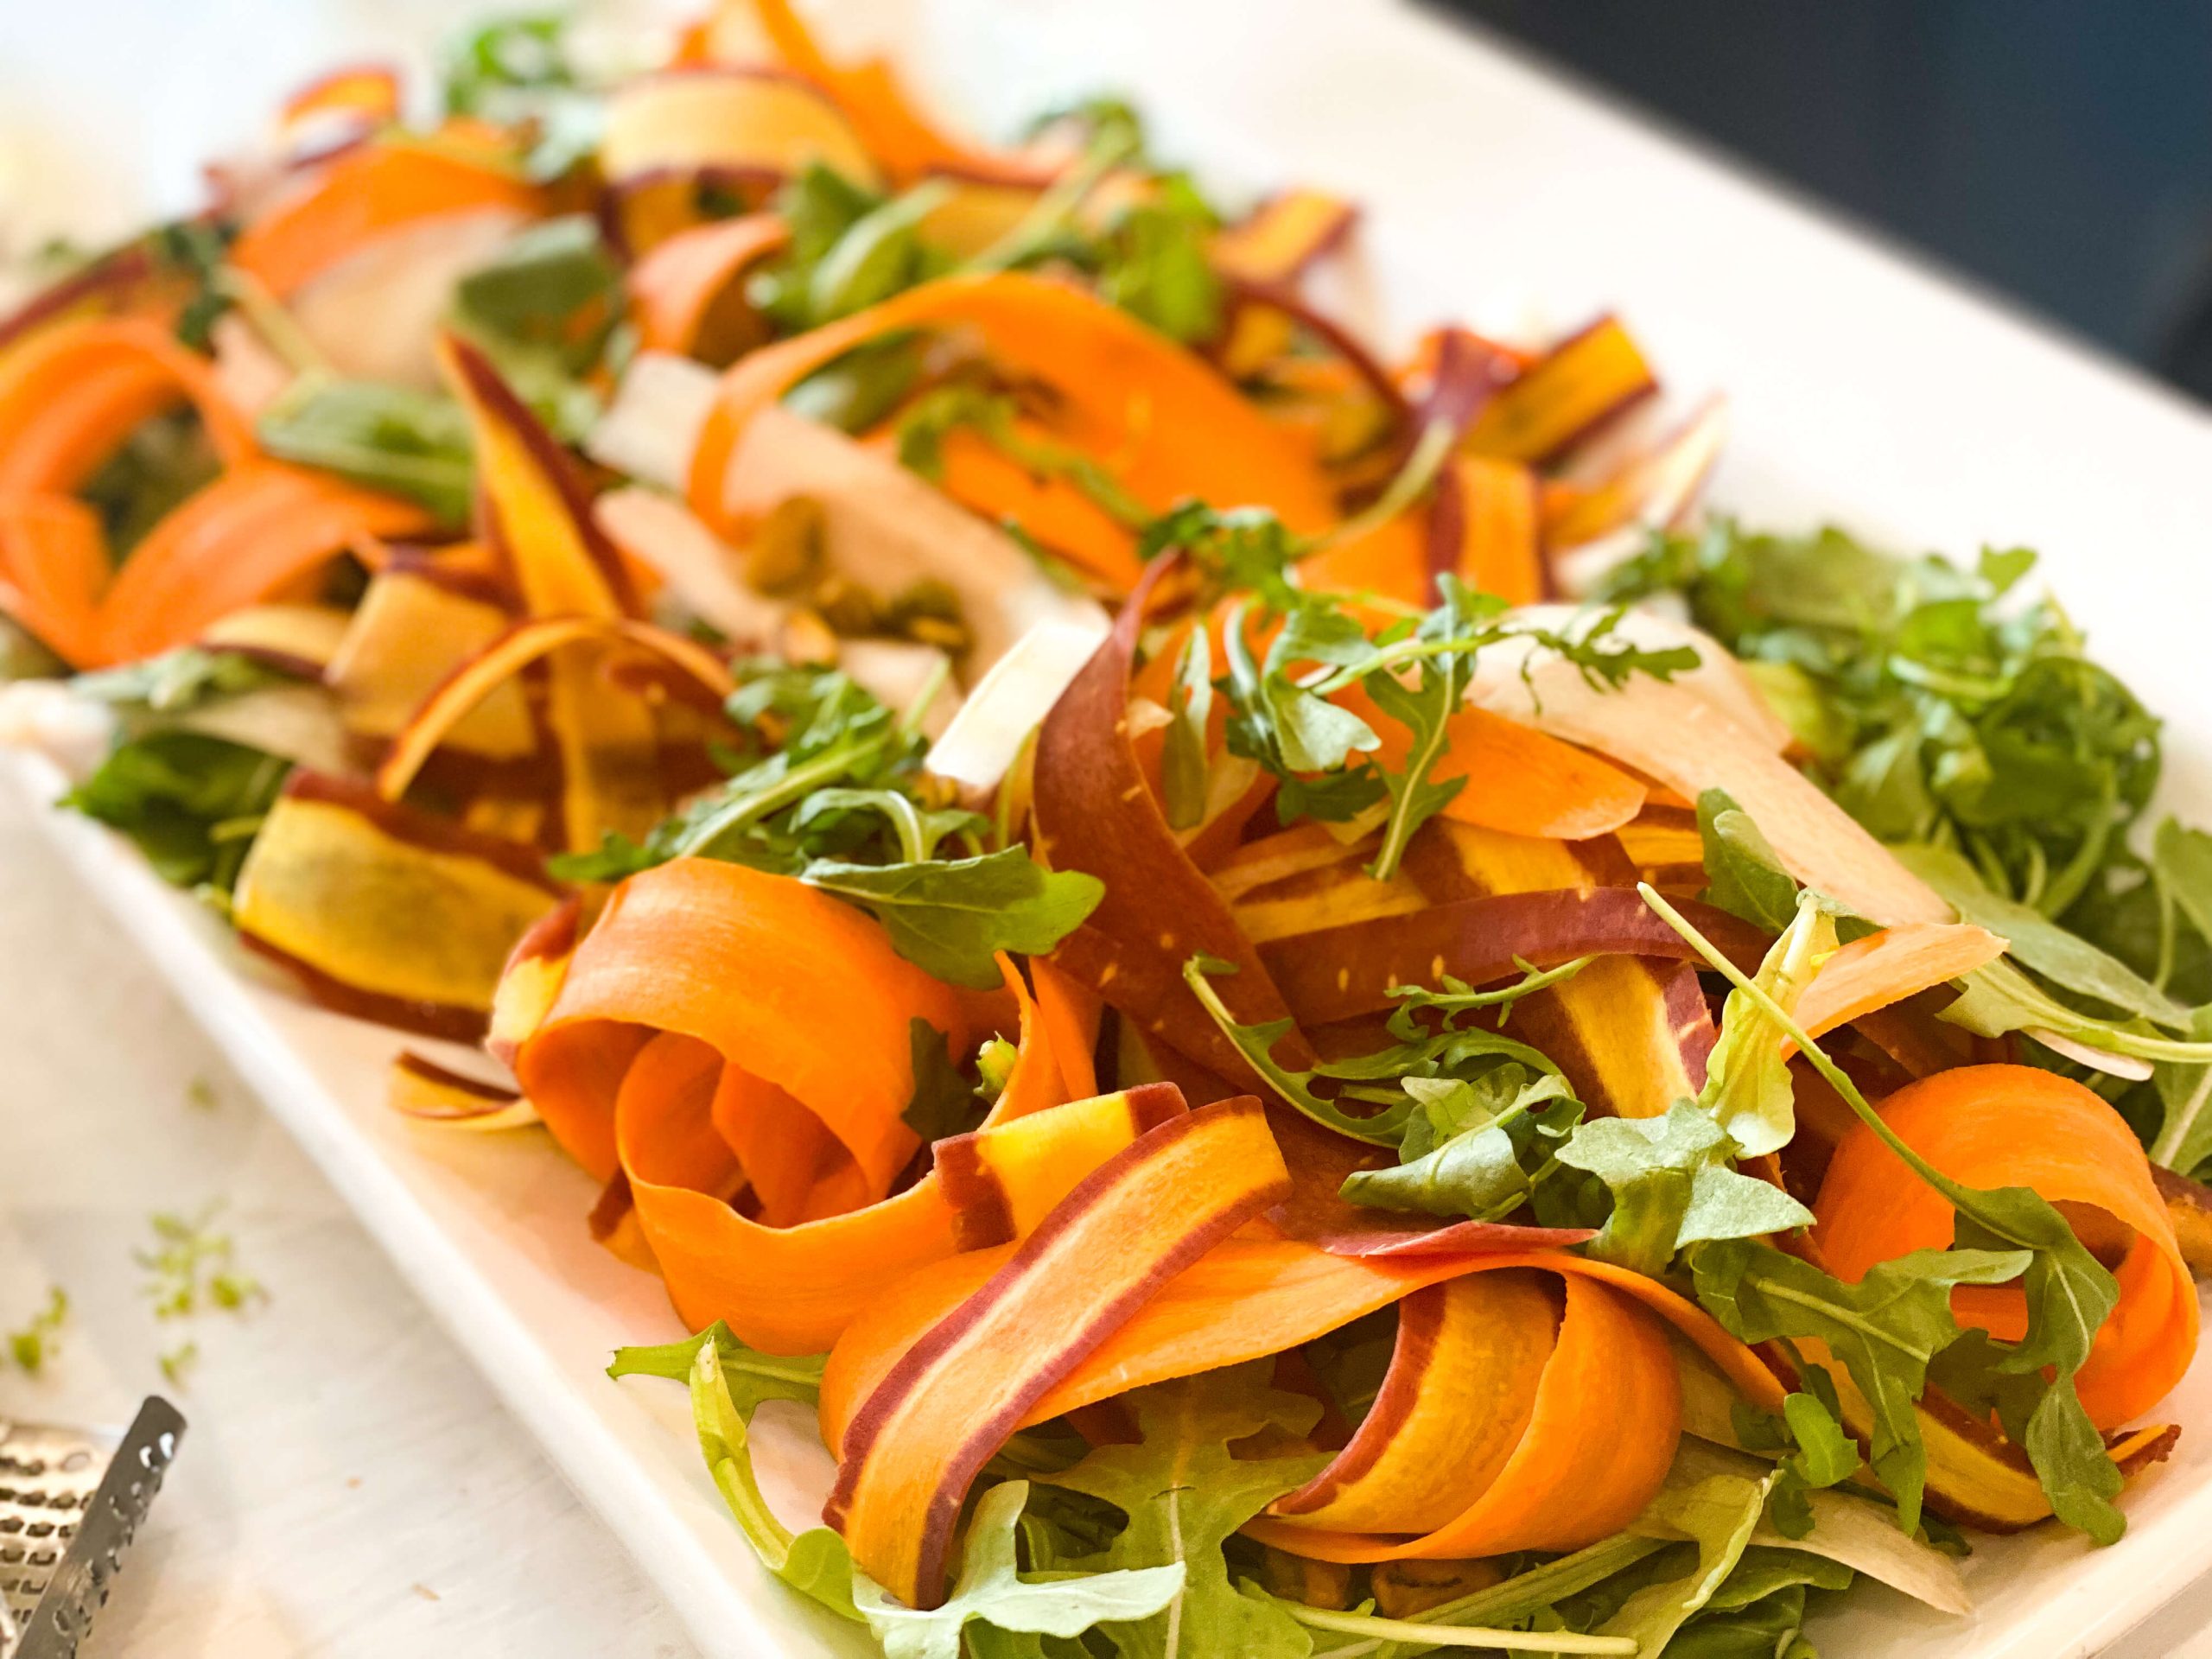 Salad on serving platter with carrot ribbons and arugula